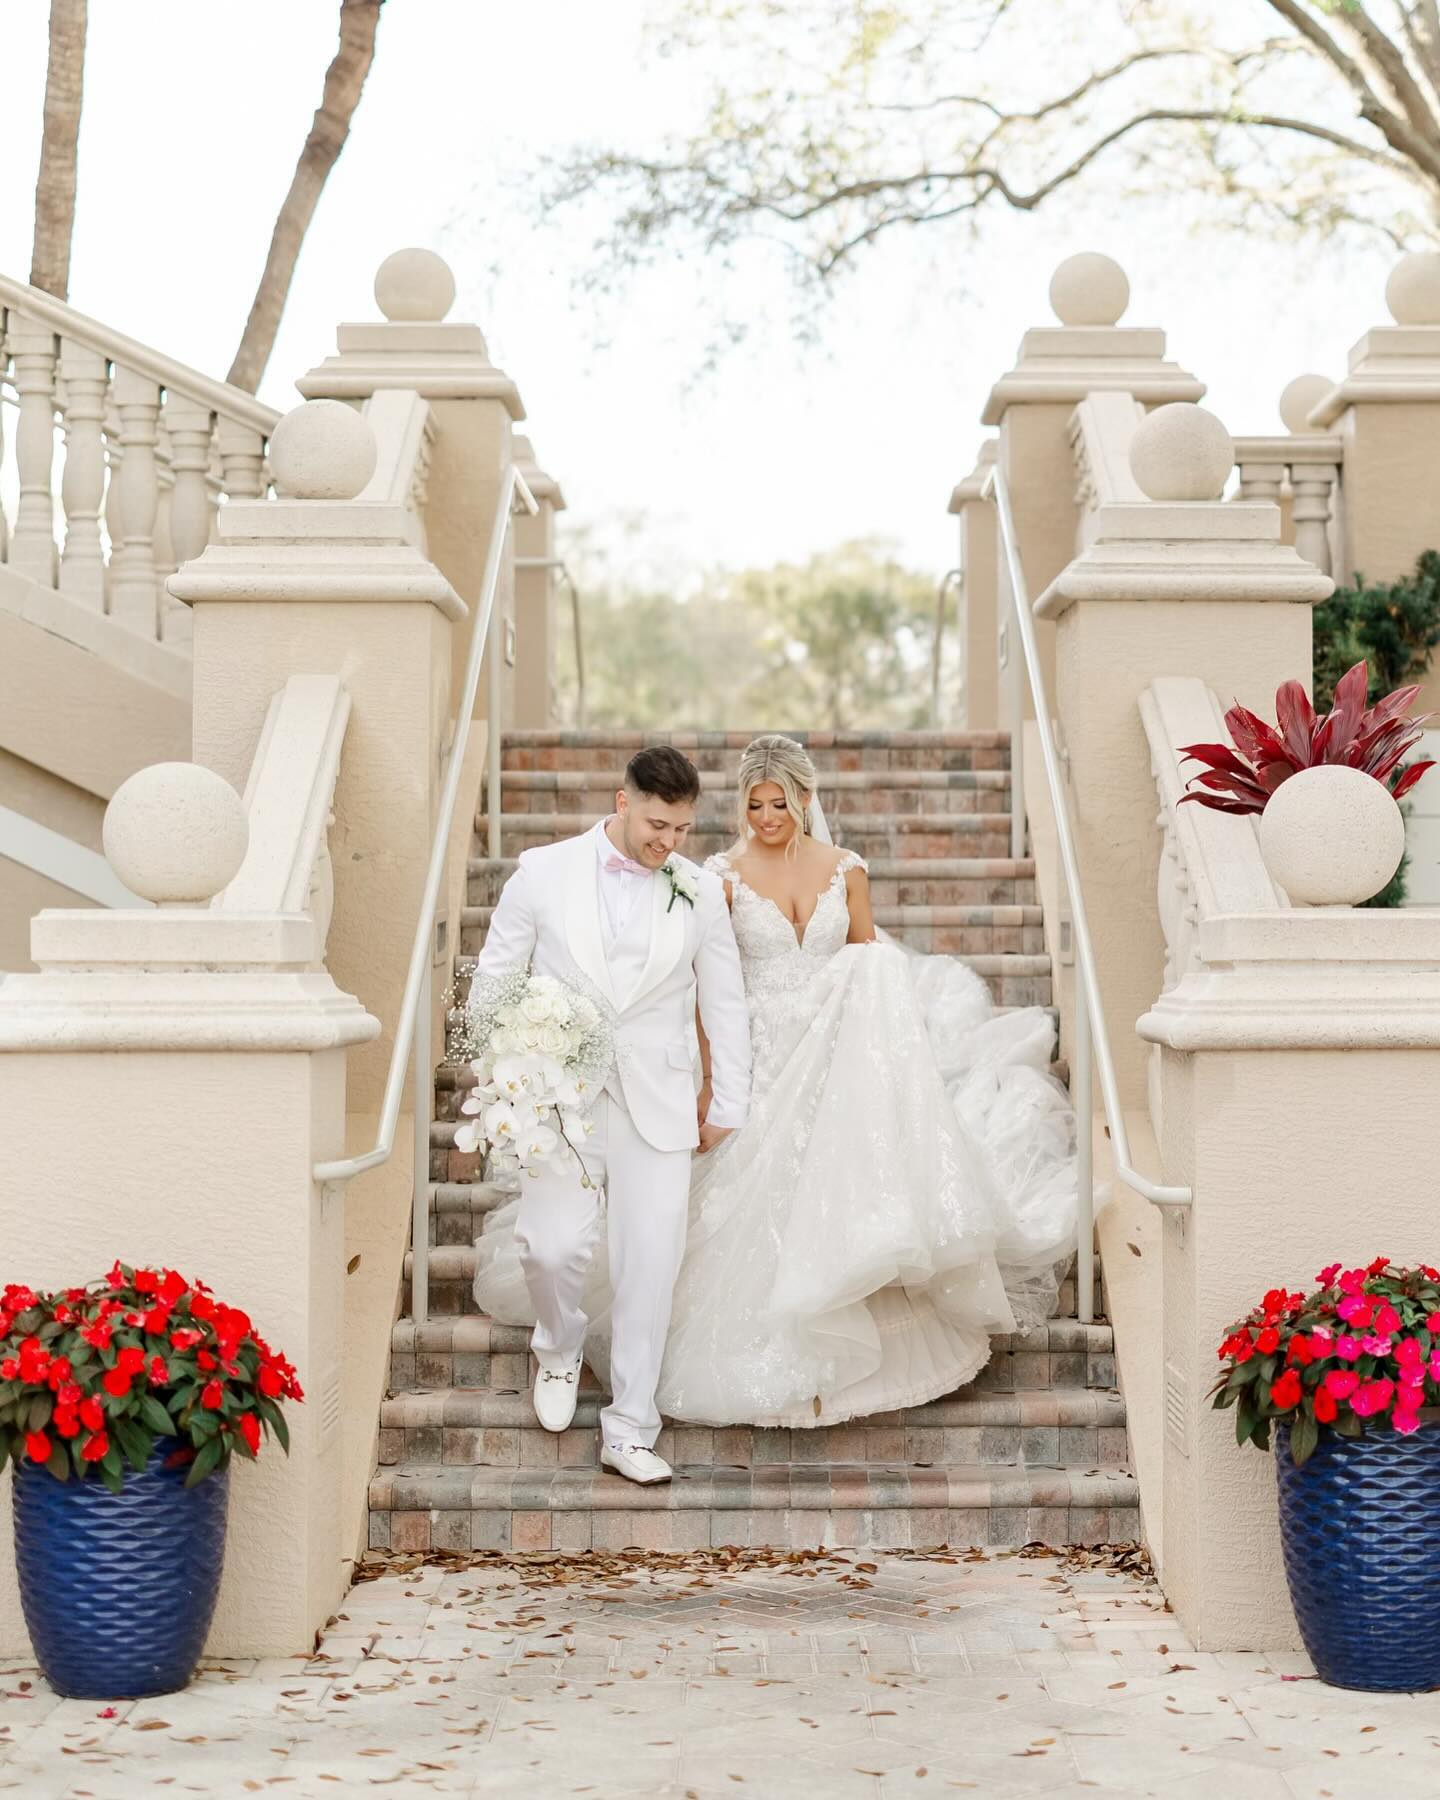 Mariah Covarrubias and her husband, Bill Ritter, on their wedding day